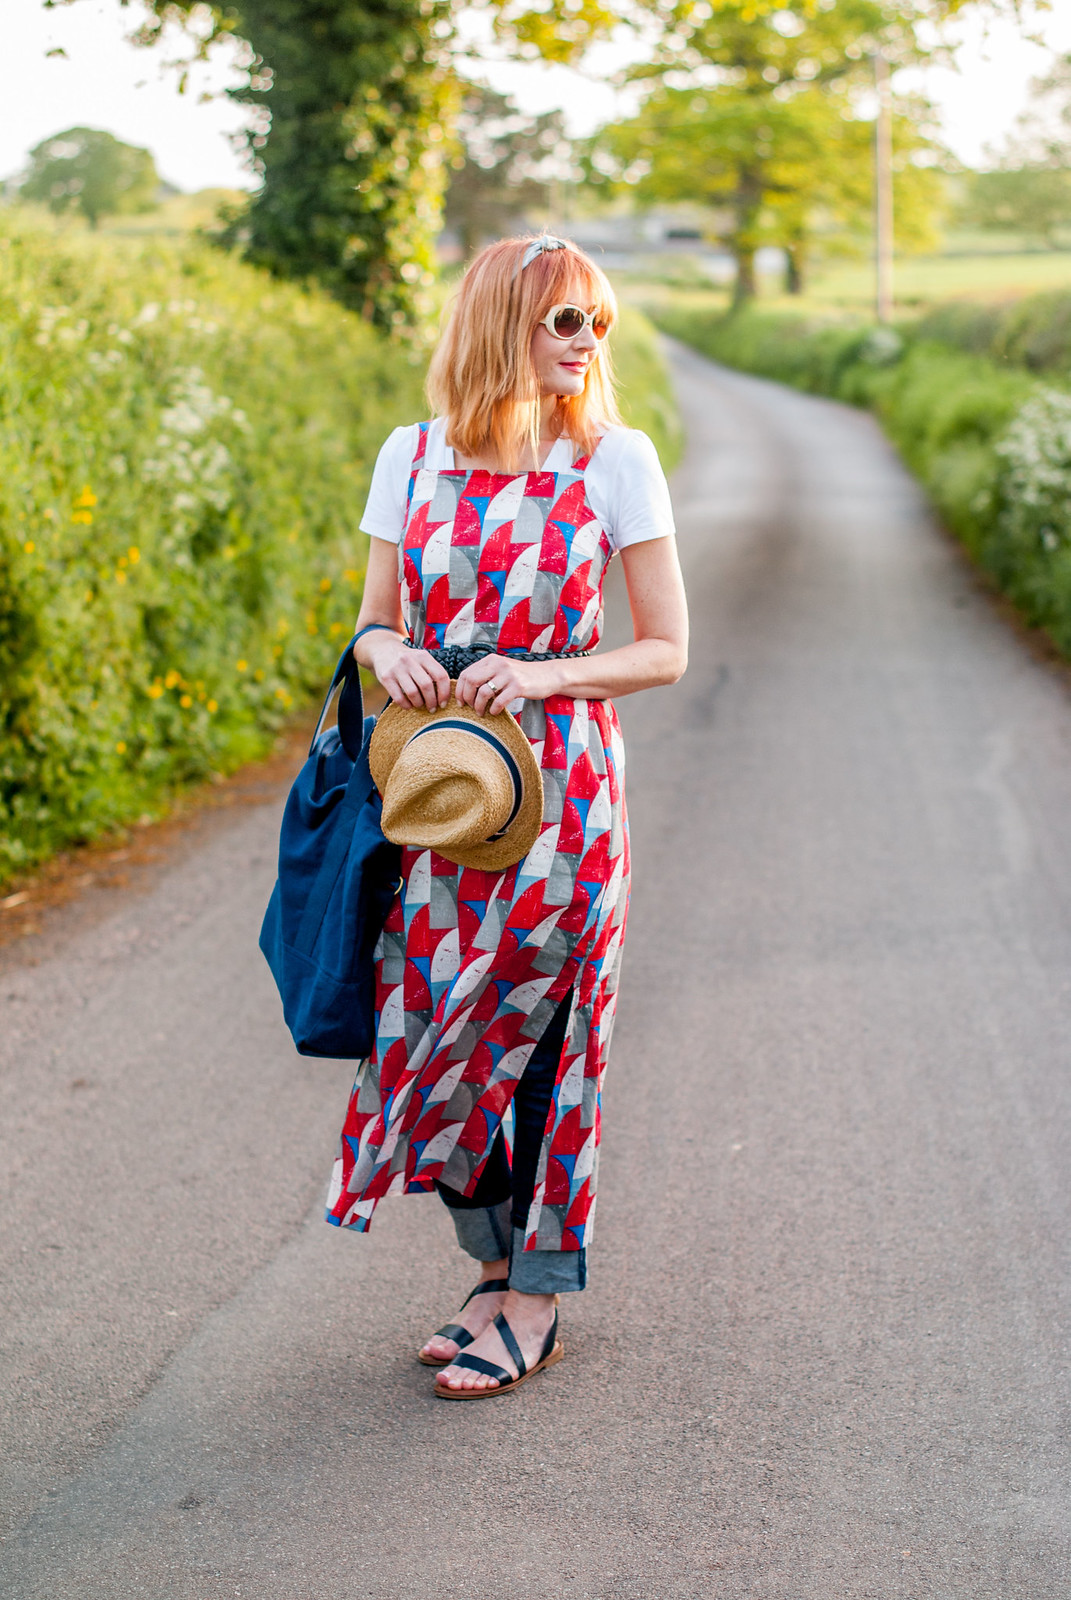 Summer dressing: Strappy printed maxi dress over jeans and white t-shirt retro styling preppy style | Not Dressed As Lamb, over 40 blog